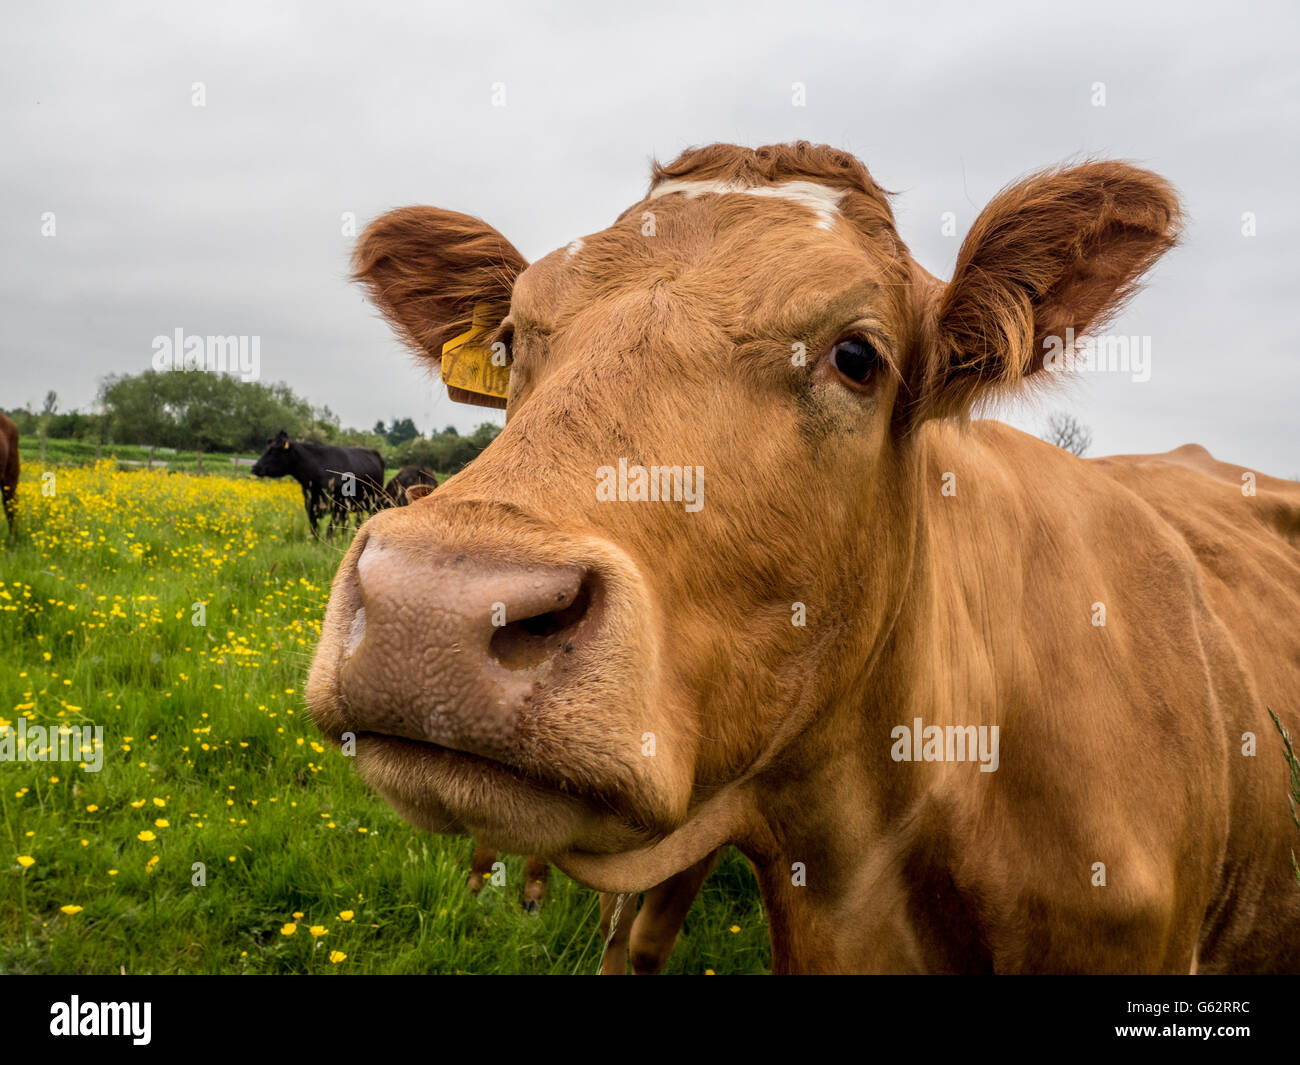 Cow in field Stock Photo